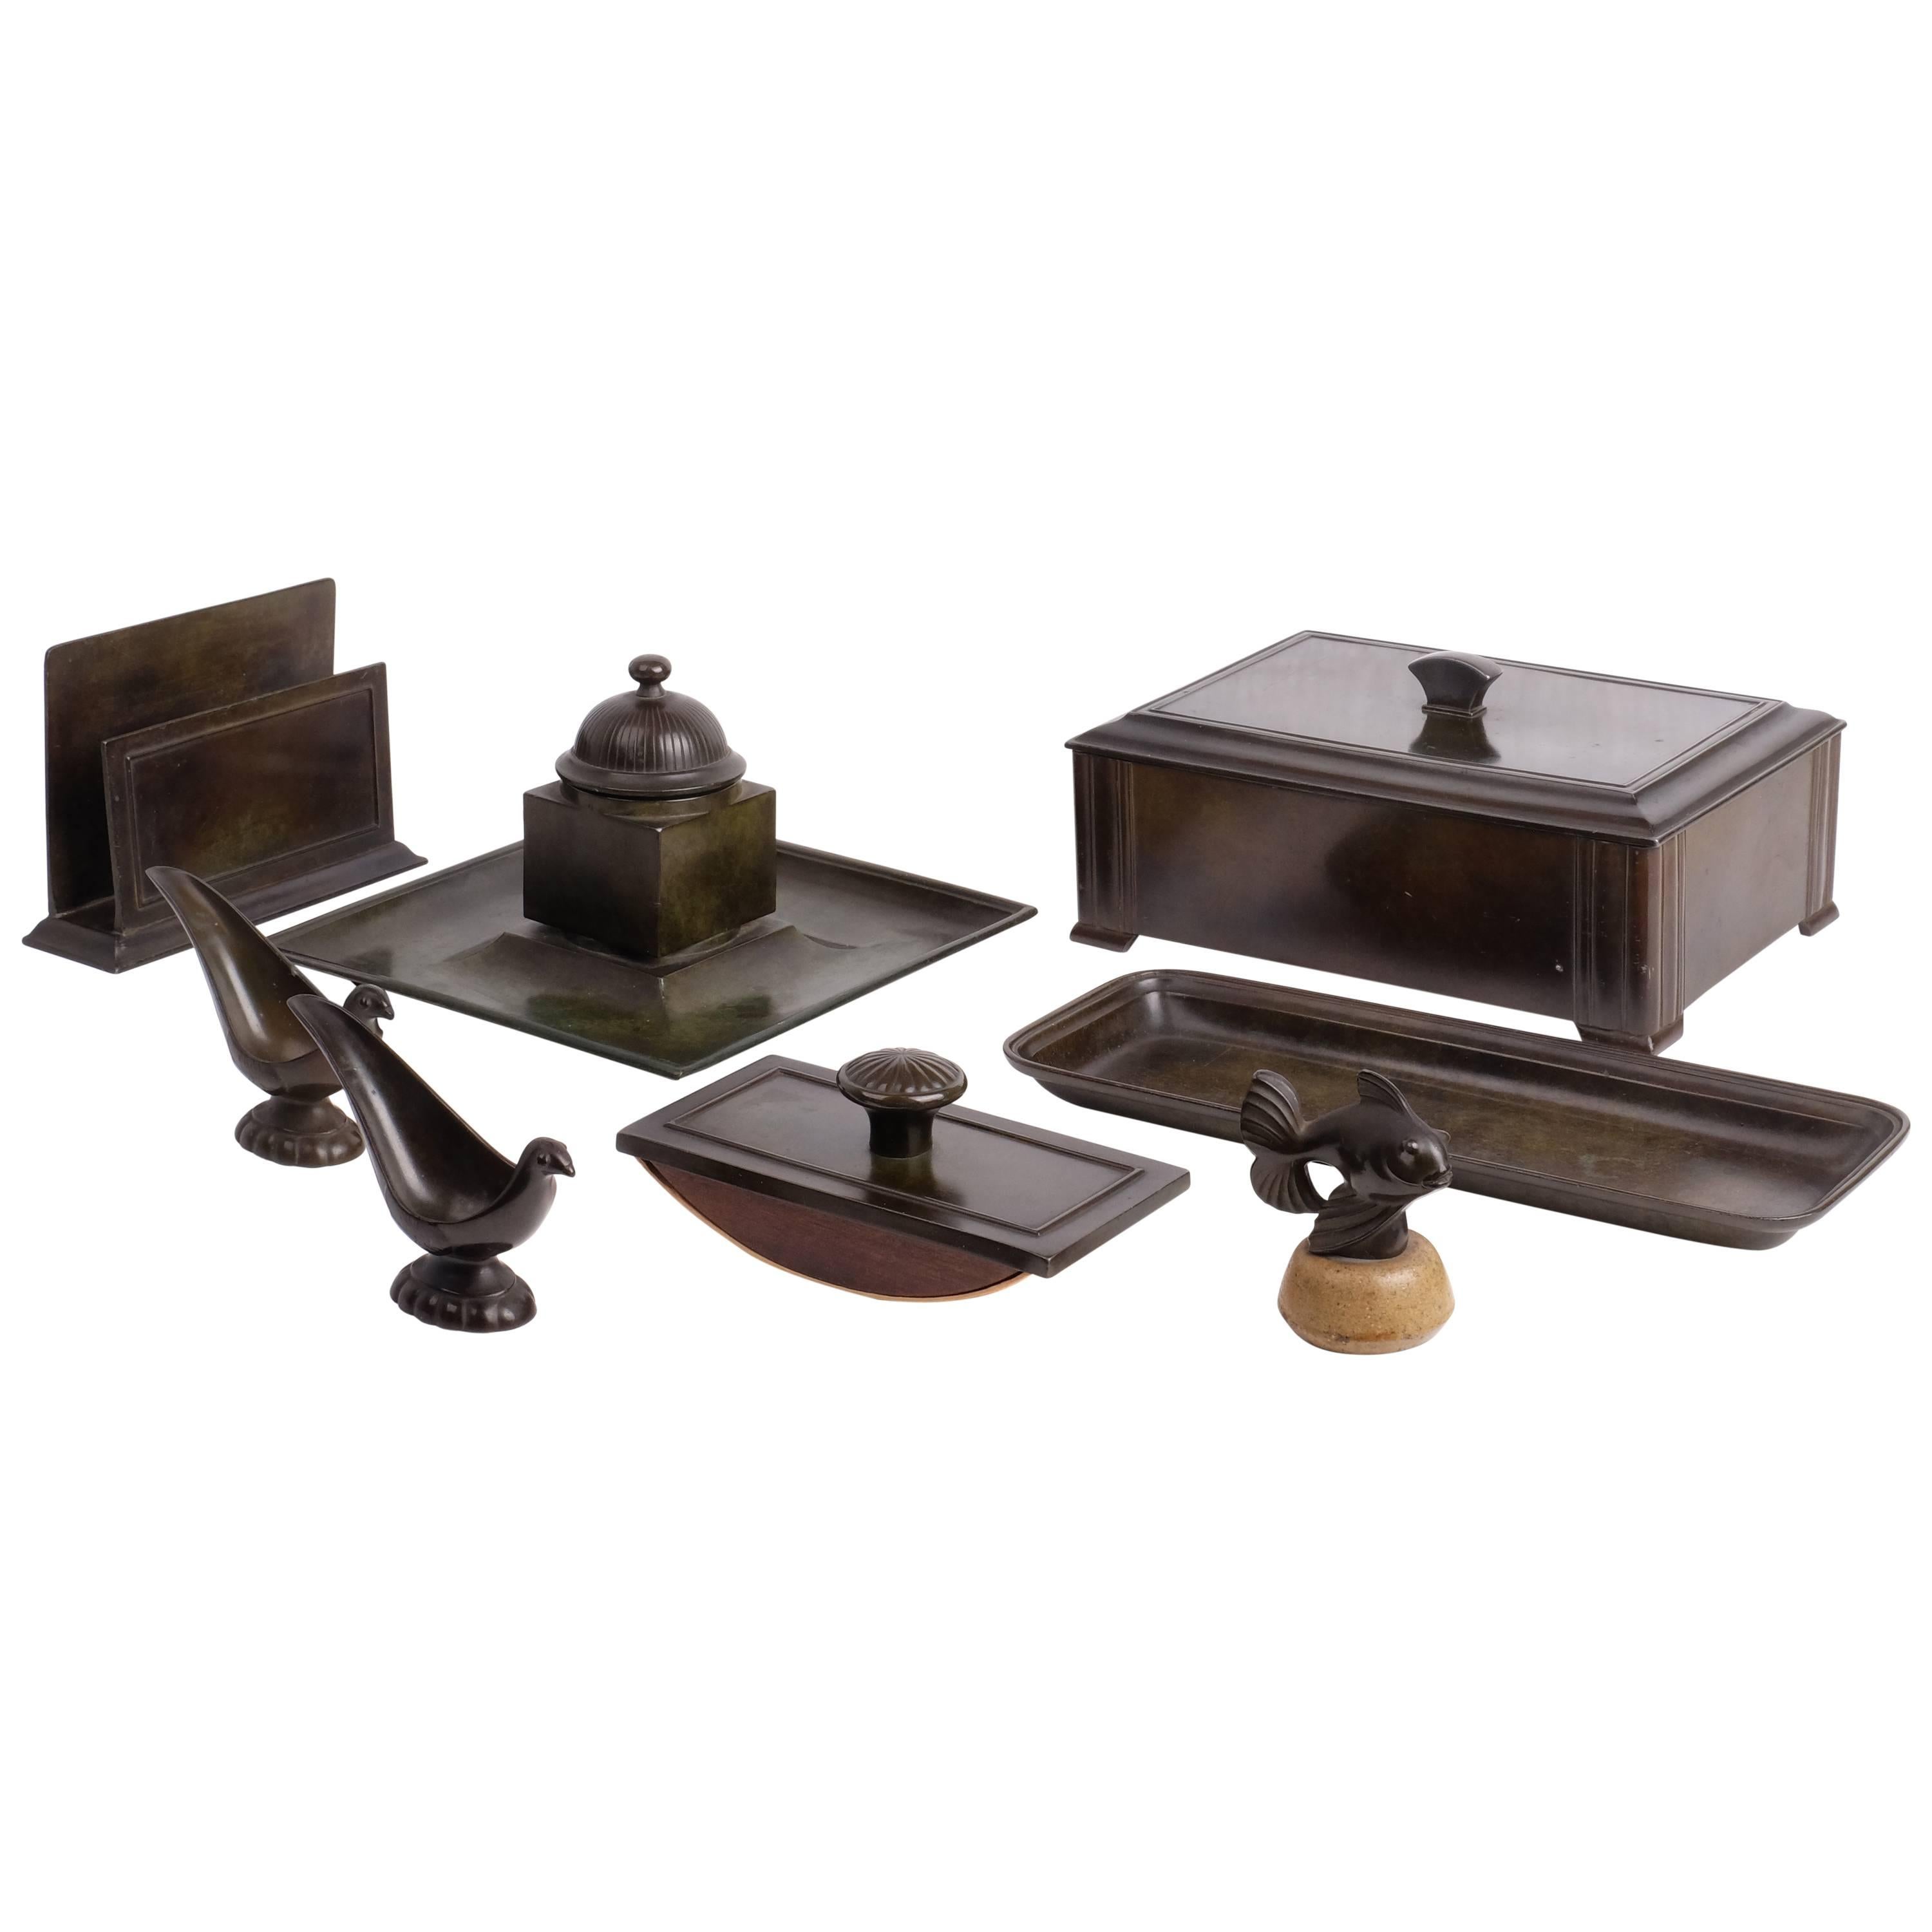 Eight Items in Disko Metal for on a Desk by Just Andersen, 1930s, Denmark For Sale